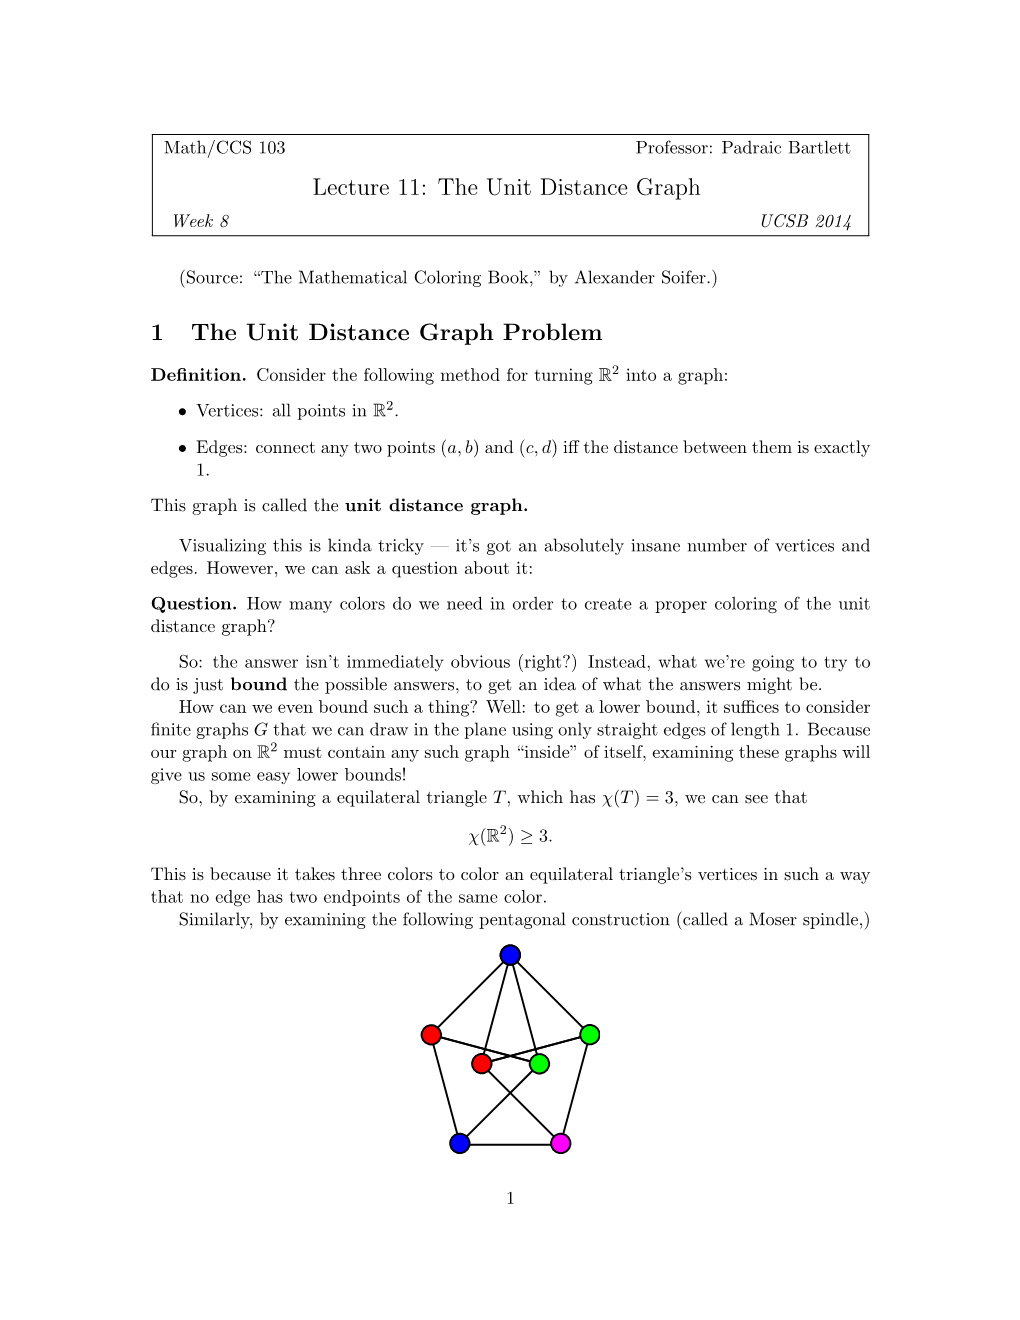 The Unit Distance Graph Problem and Equivalence Relations